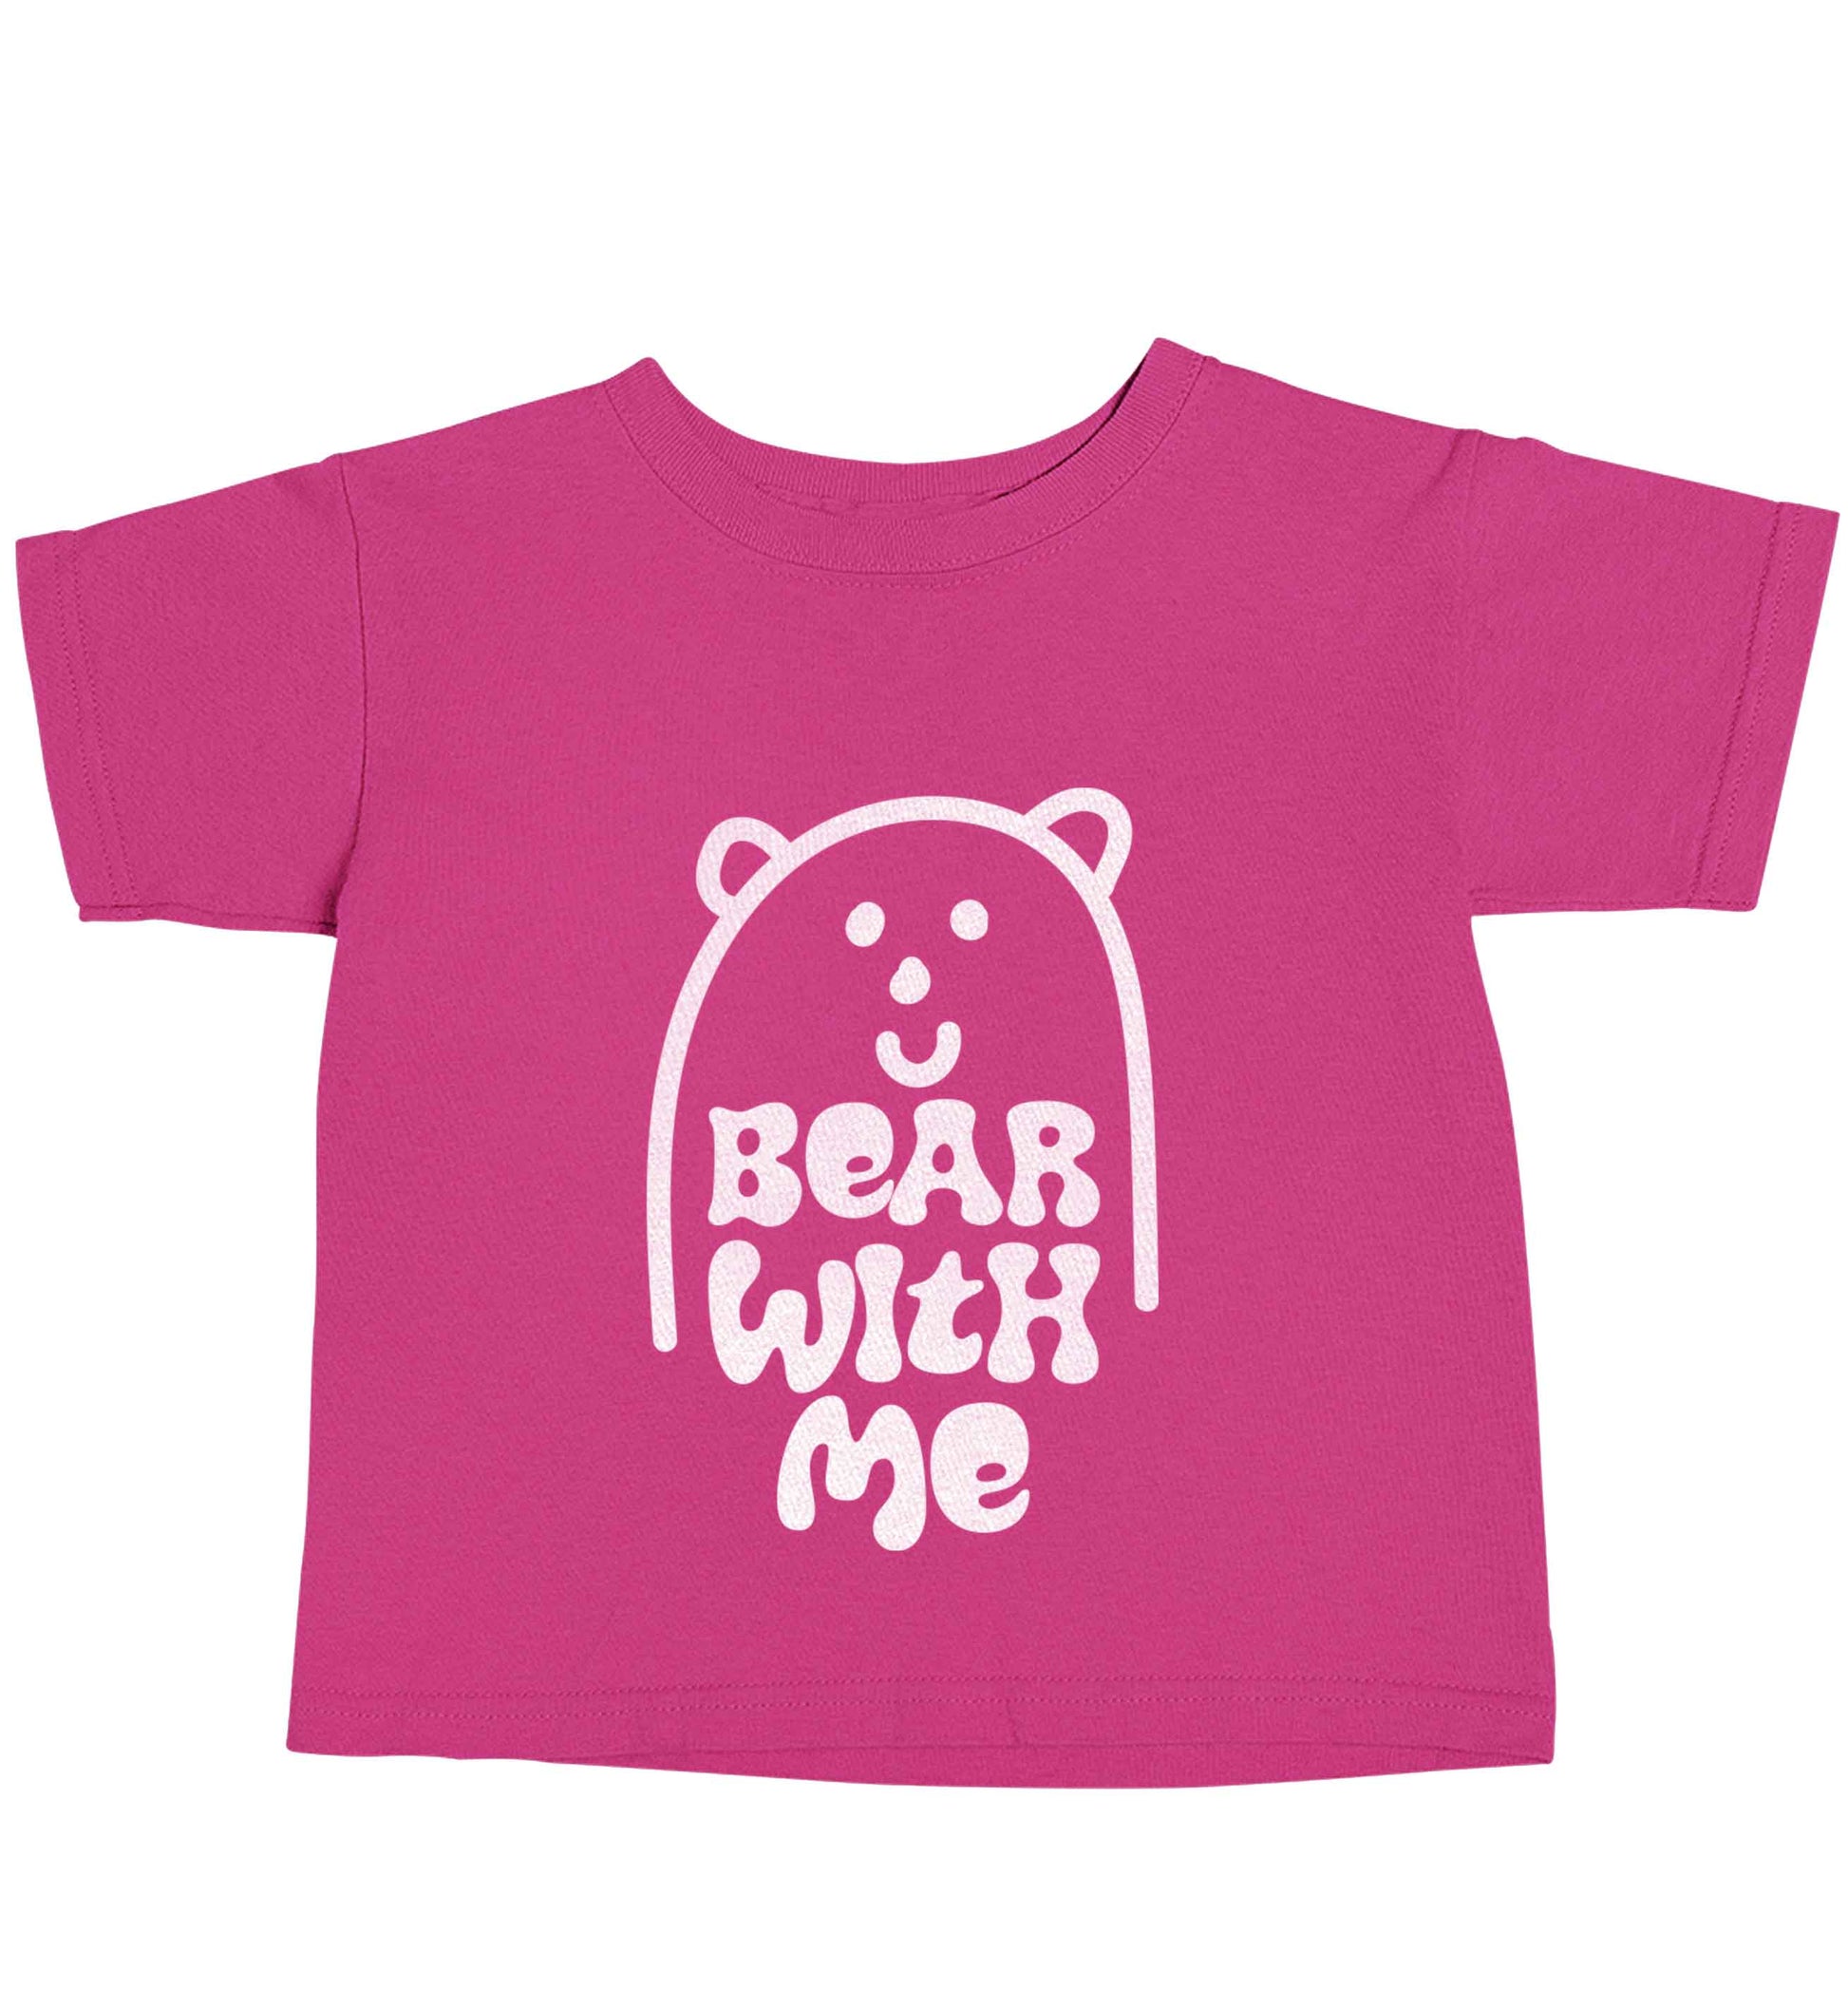 Bear With Me Kit pink baby toddler Tshirt 2 Years